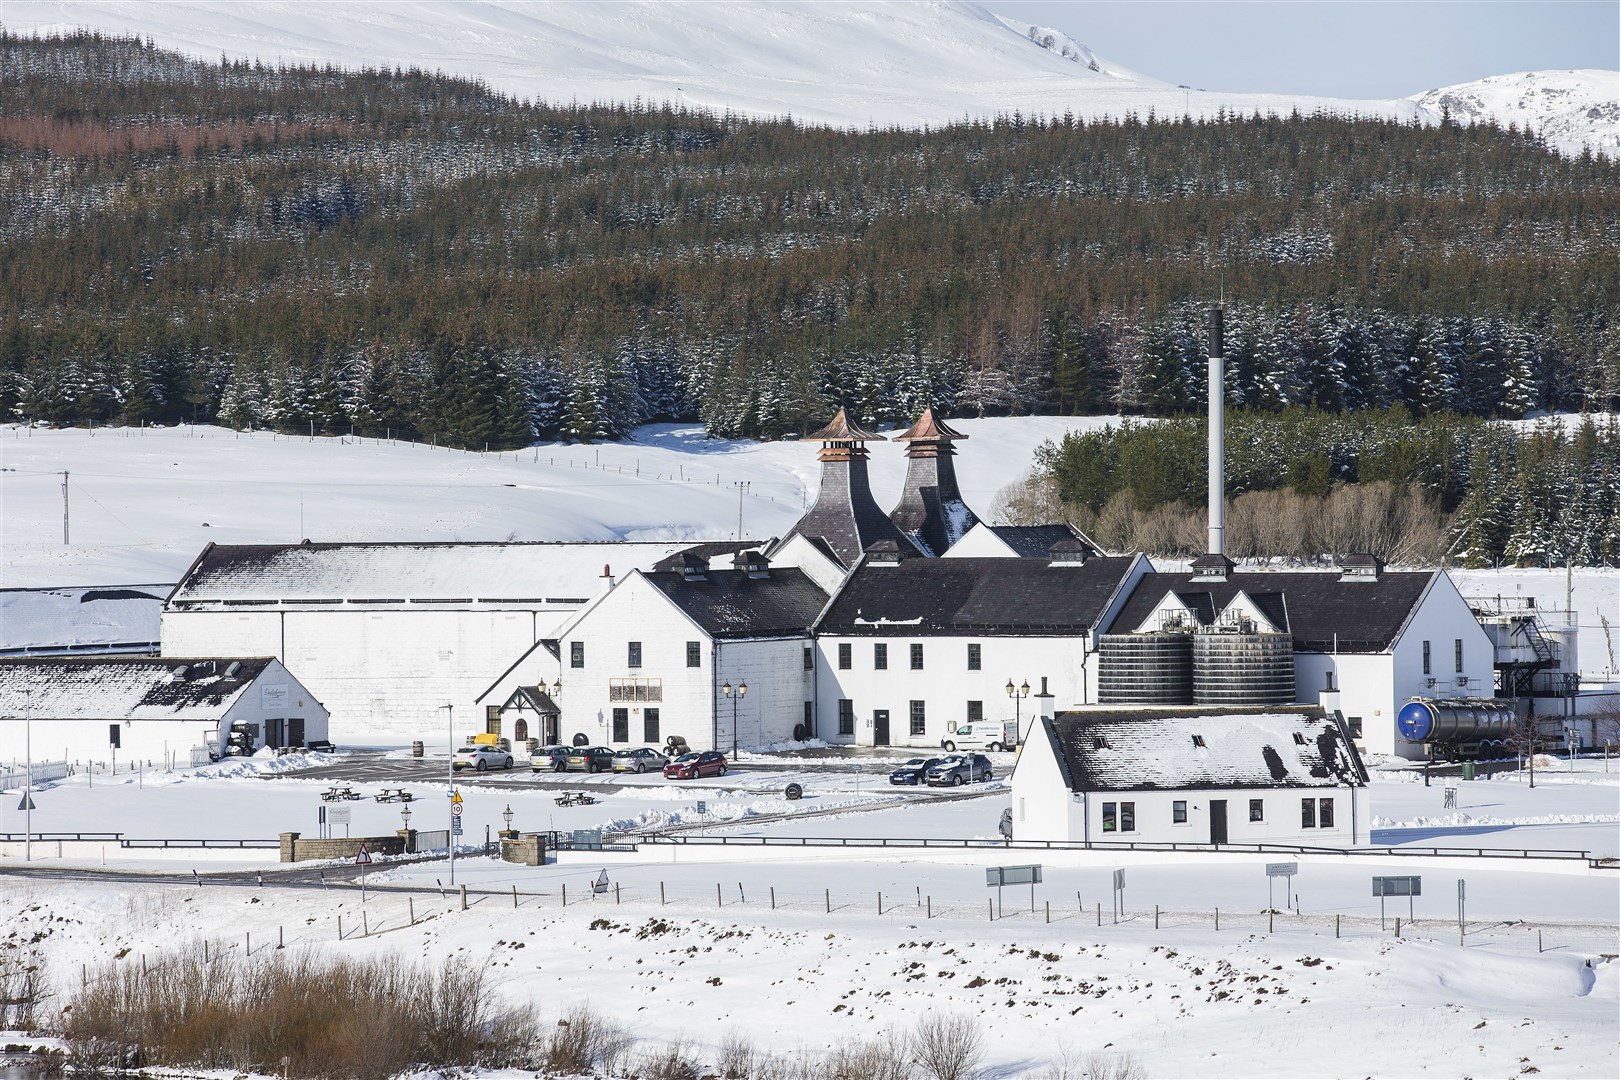 Dalwhinnie which is home to the famous distillery of the same name has recorded the UK's coldest temperature of the year so far.